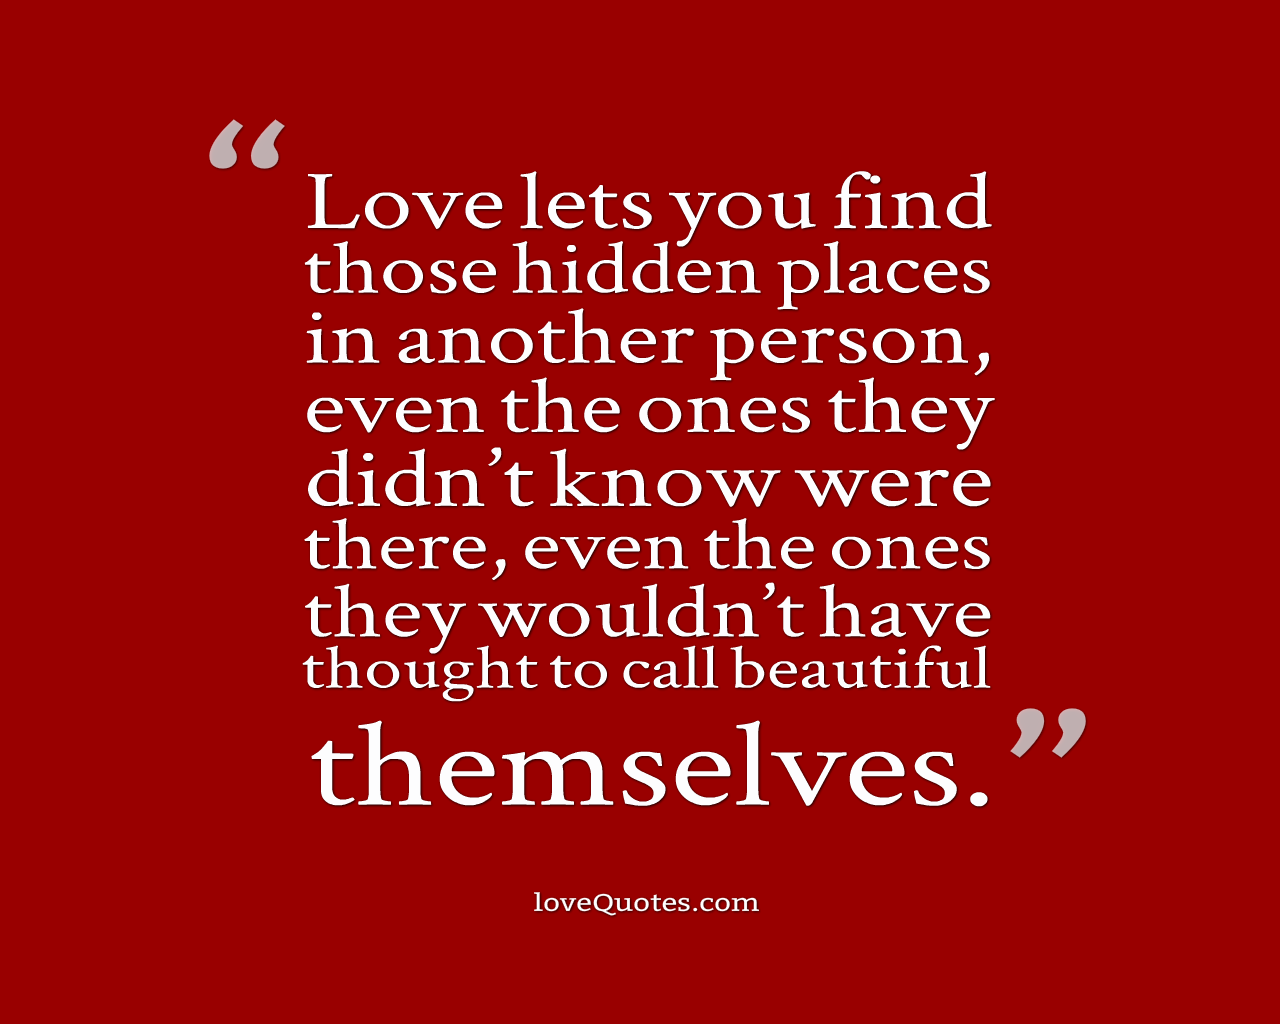 Love Lets You Find Those Hidden Places